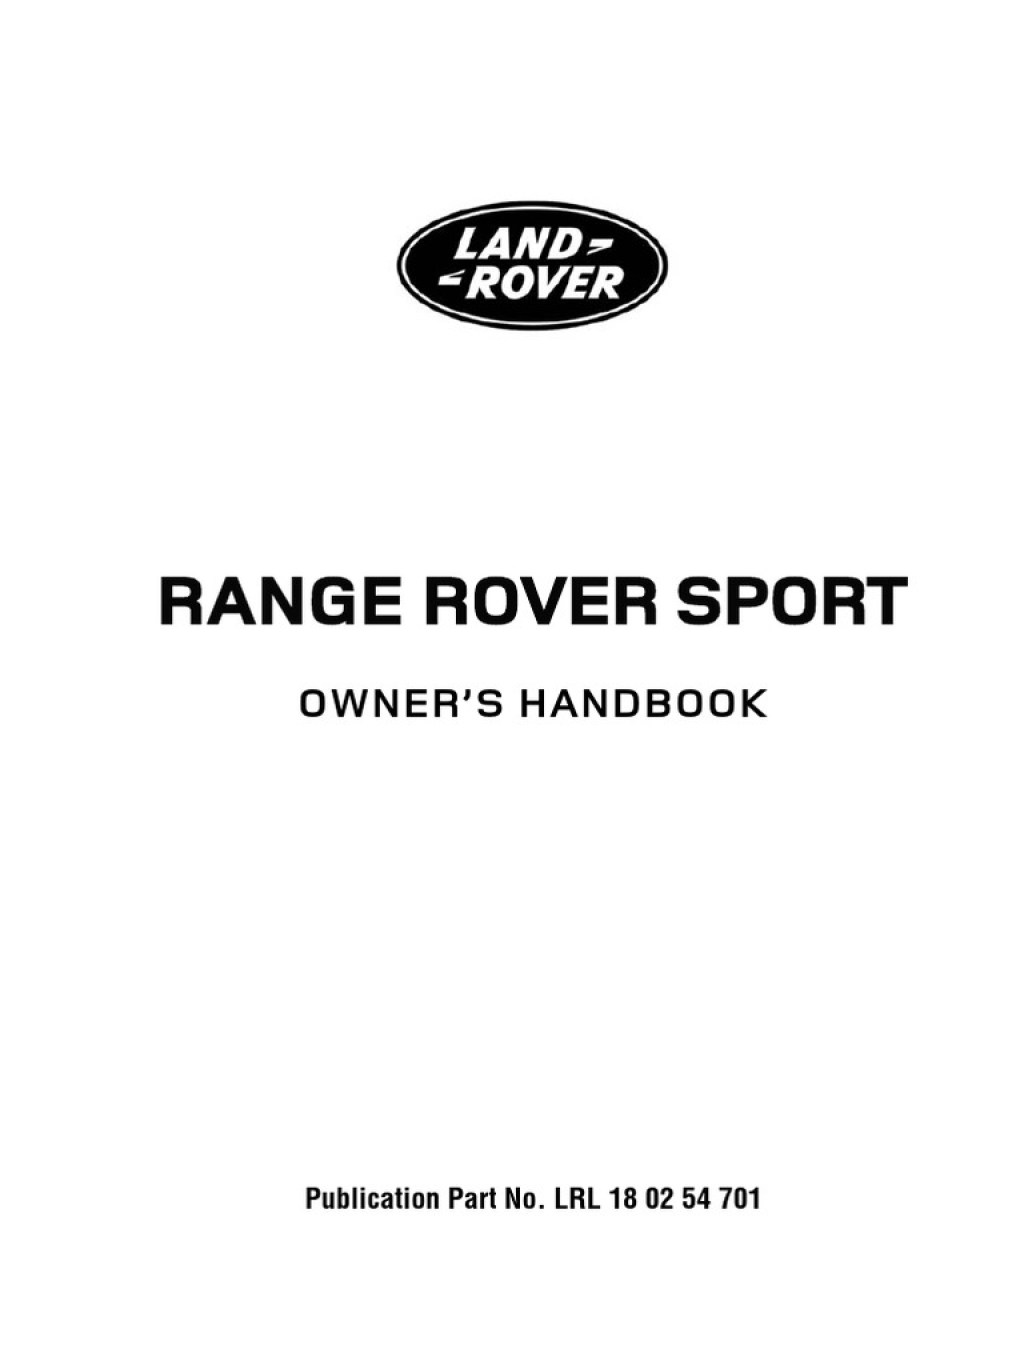 Picture of: Land Rover Range Rover Owners Manual   PDF  Headlamp  Seat Belt